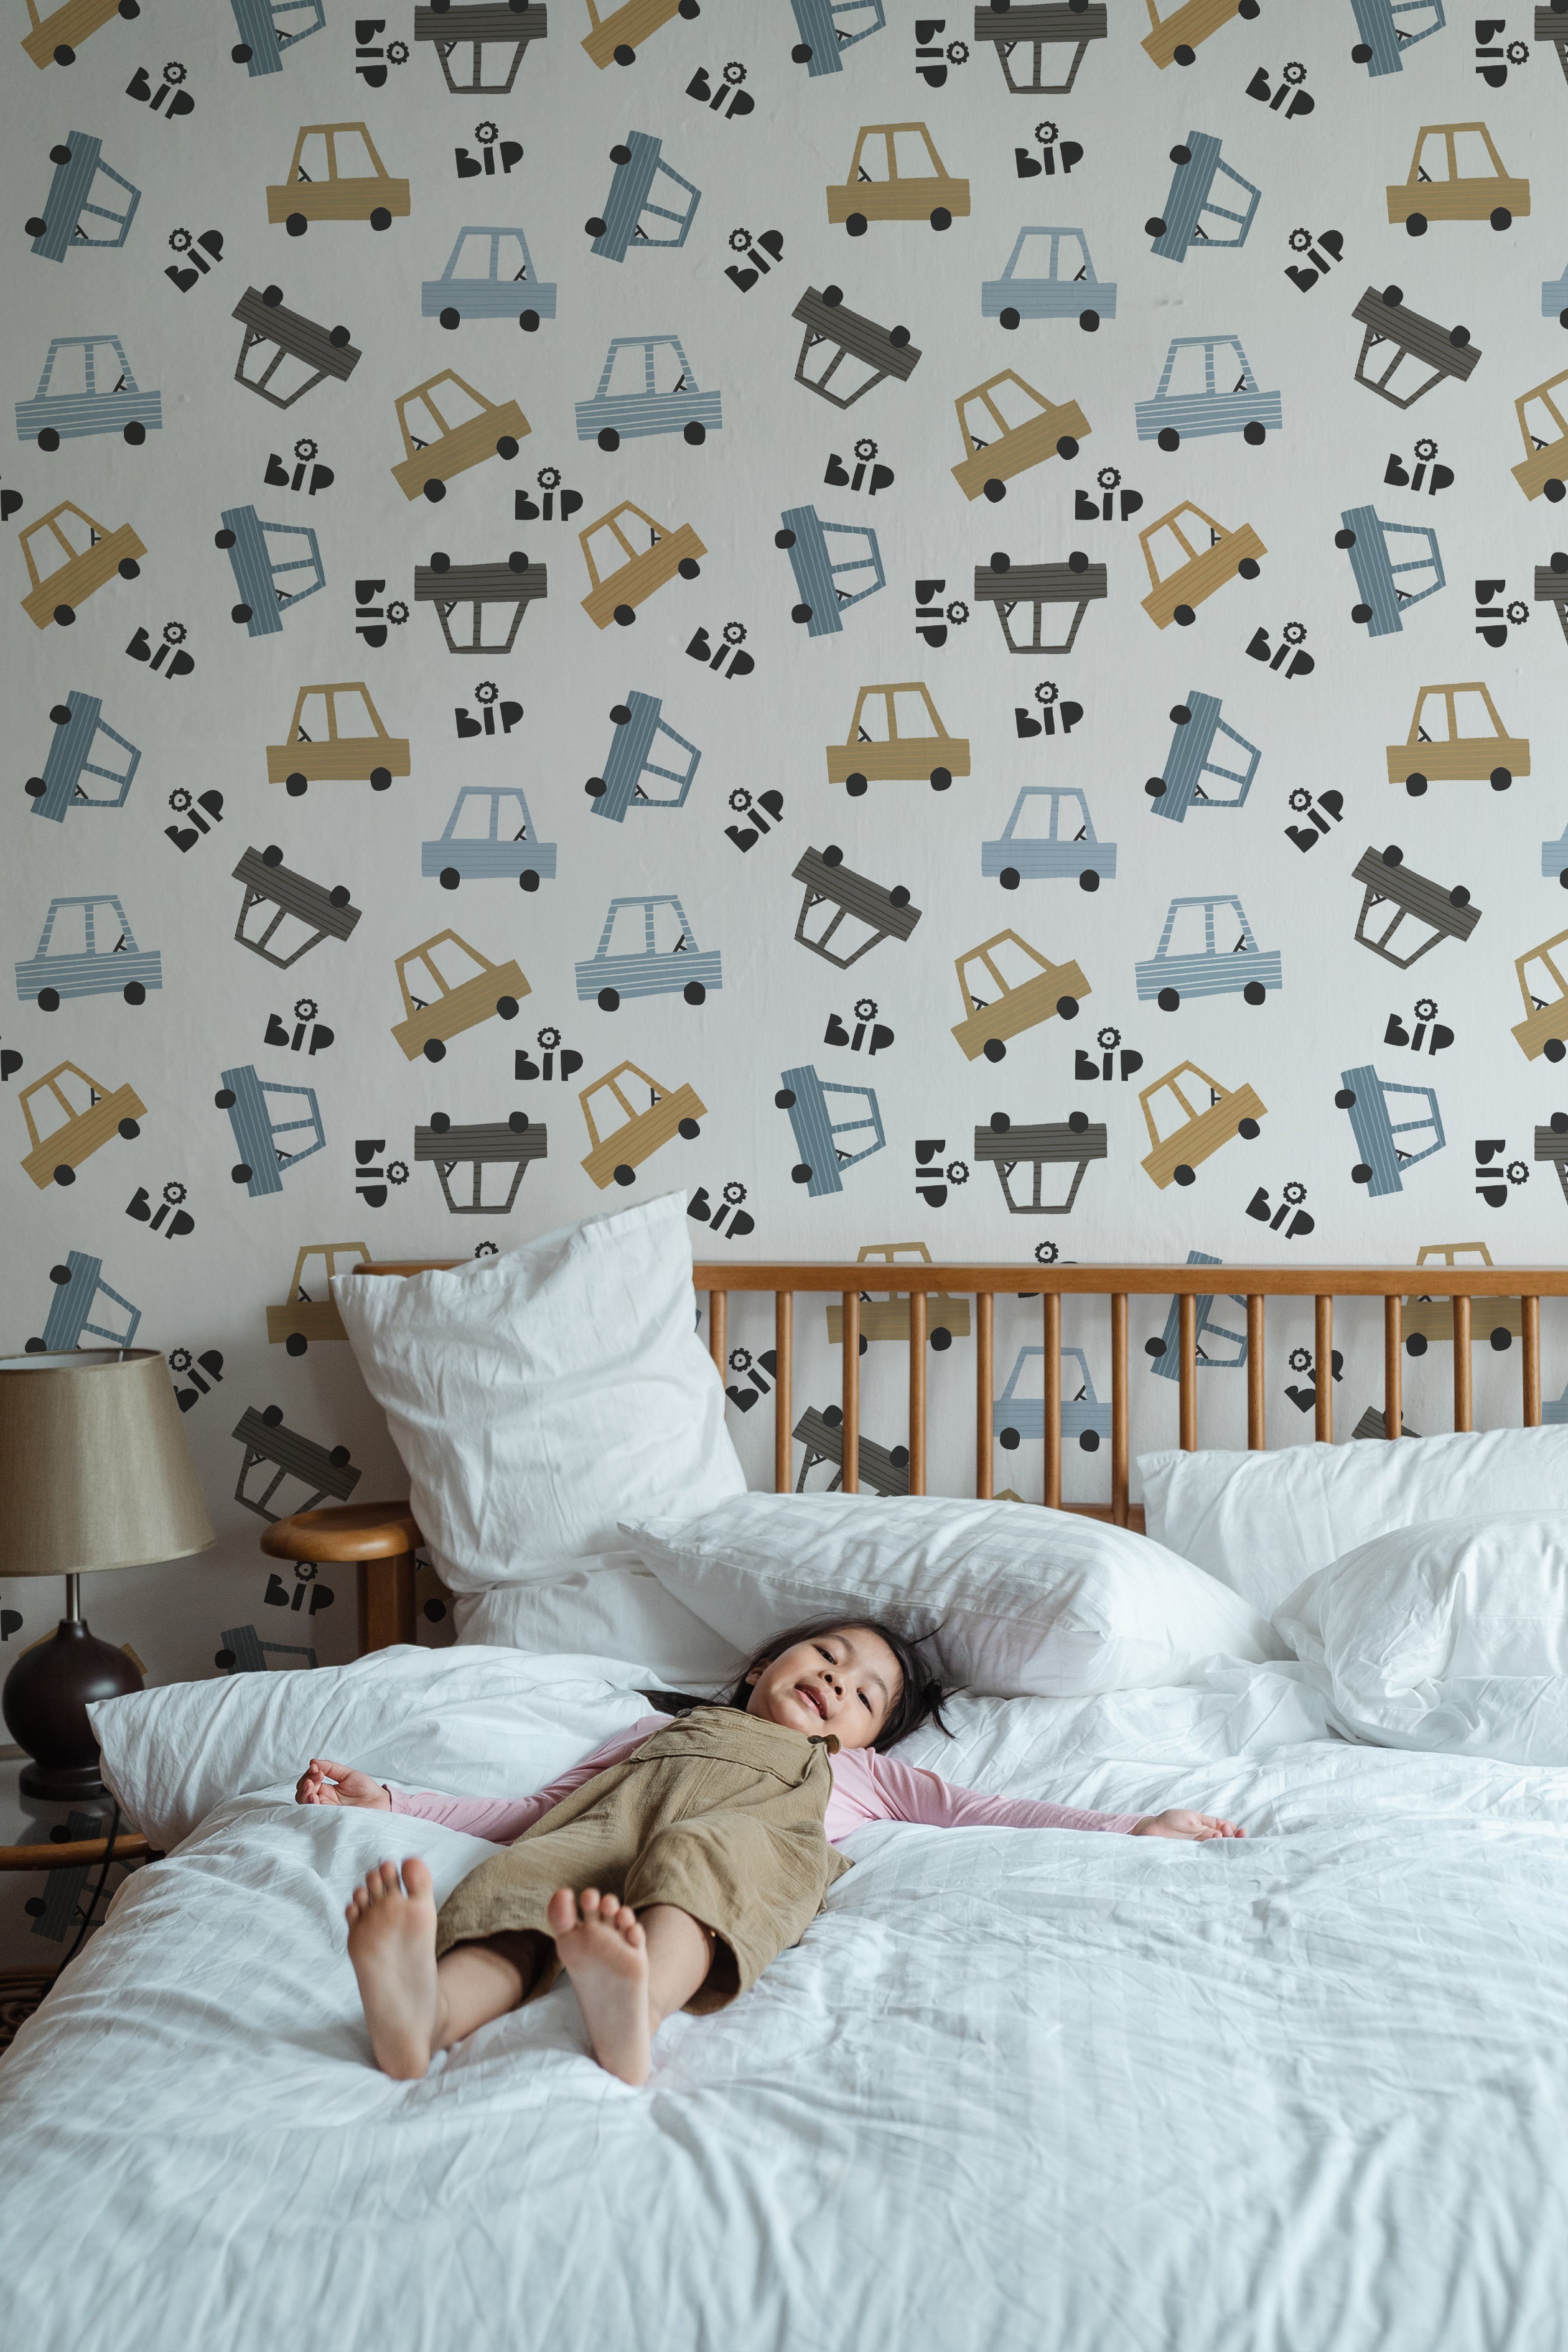 A young child sleeps peacefully on a large white bed in a room decorated with Toy Cars Wallpaper. The playful wallpaper features a variety of stylized cars in shades of blue, yellow, and gray, scattered playfully across a light background